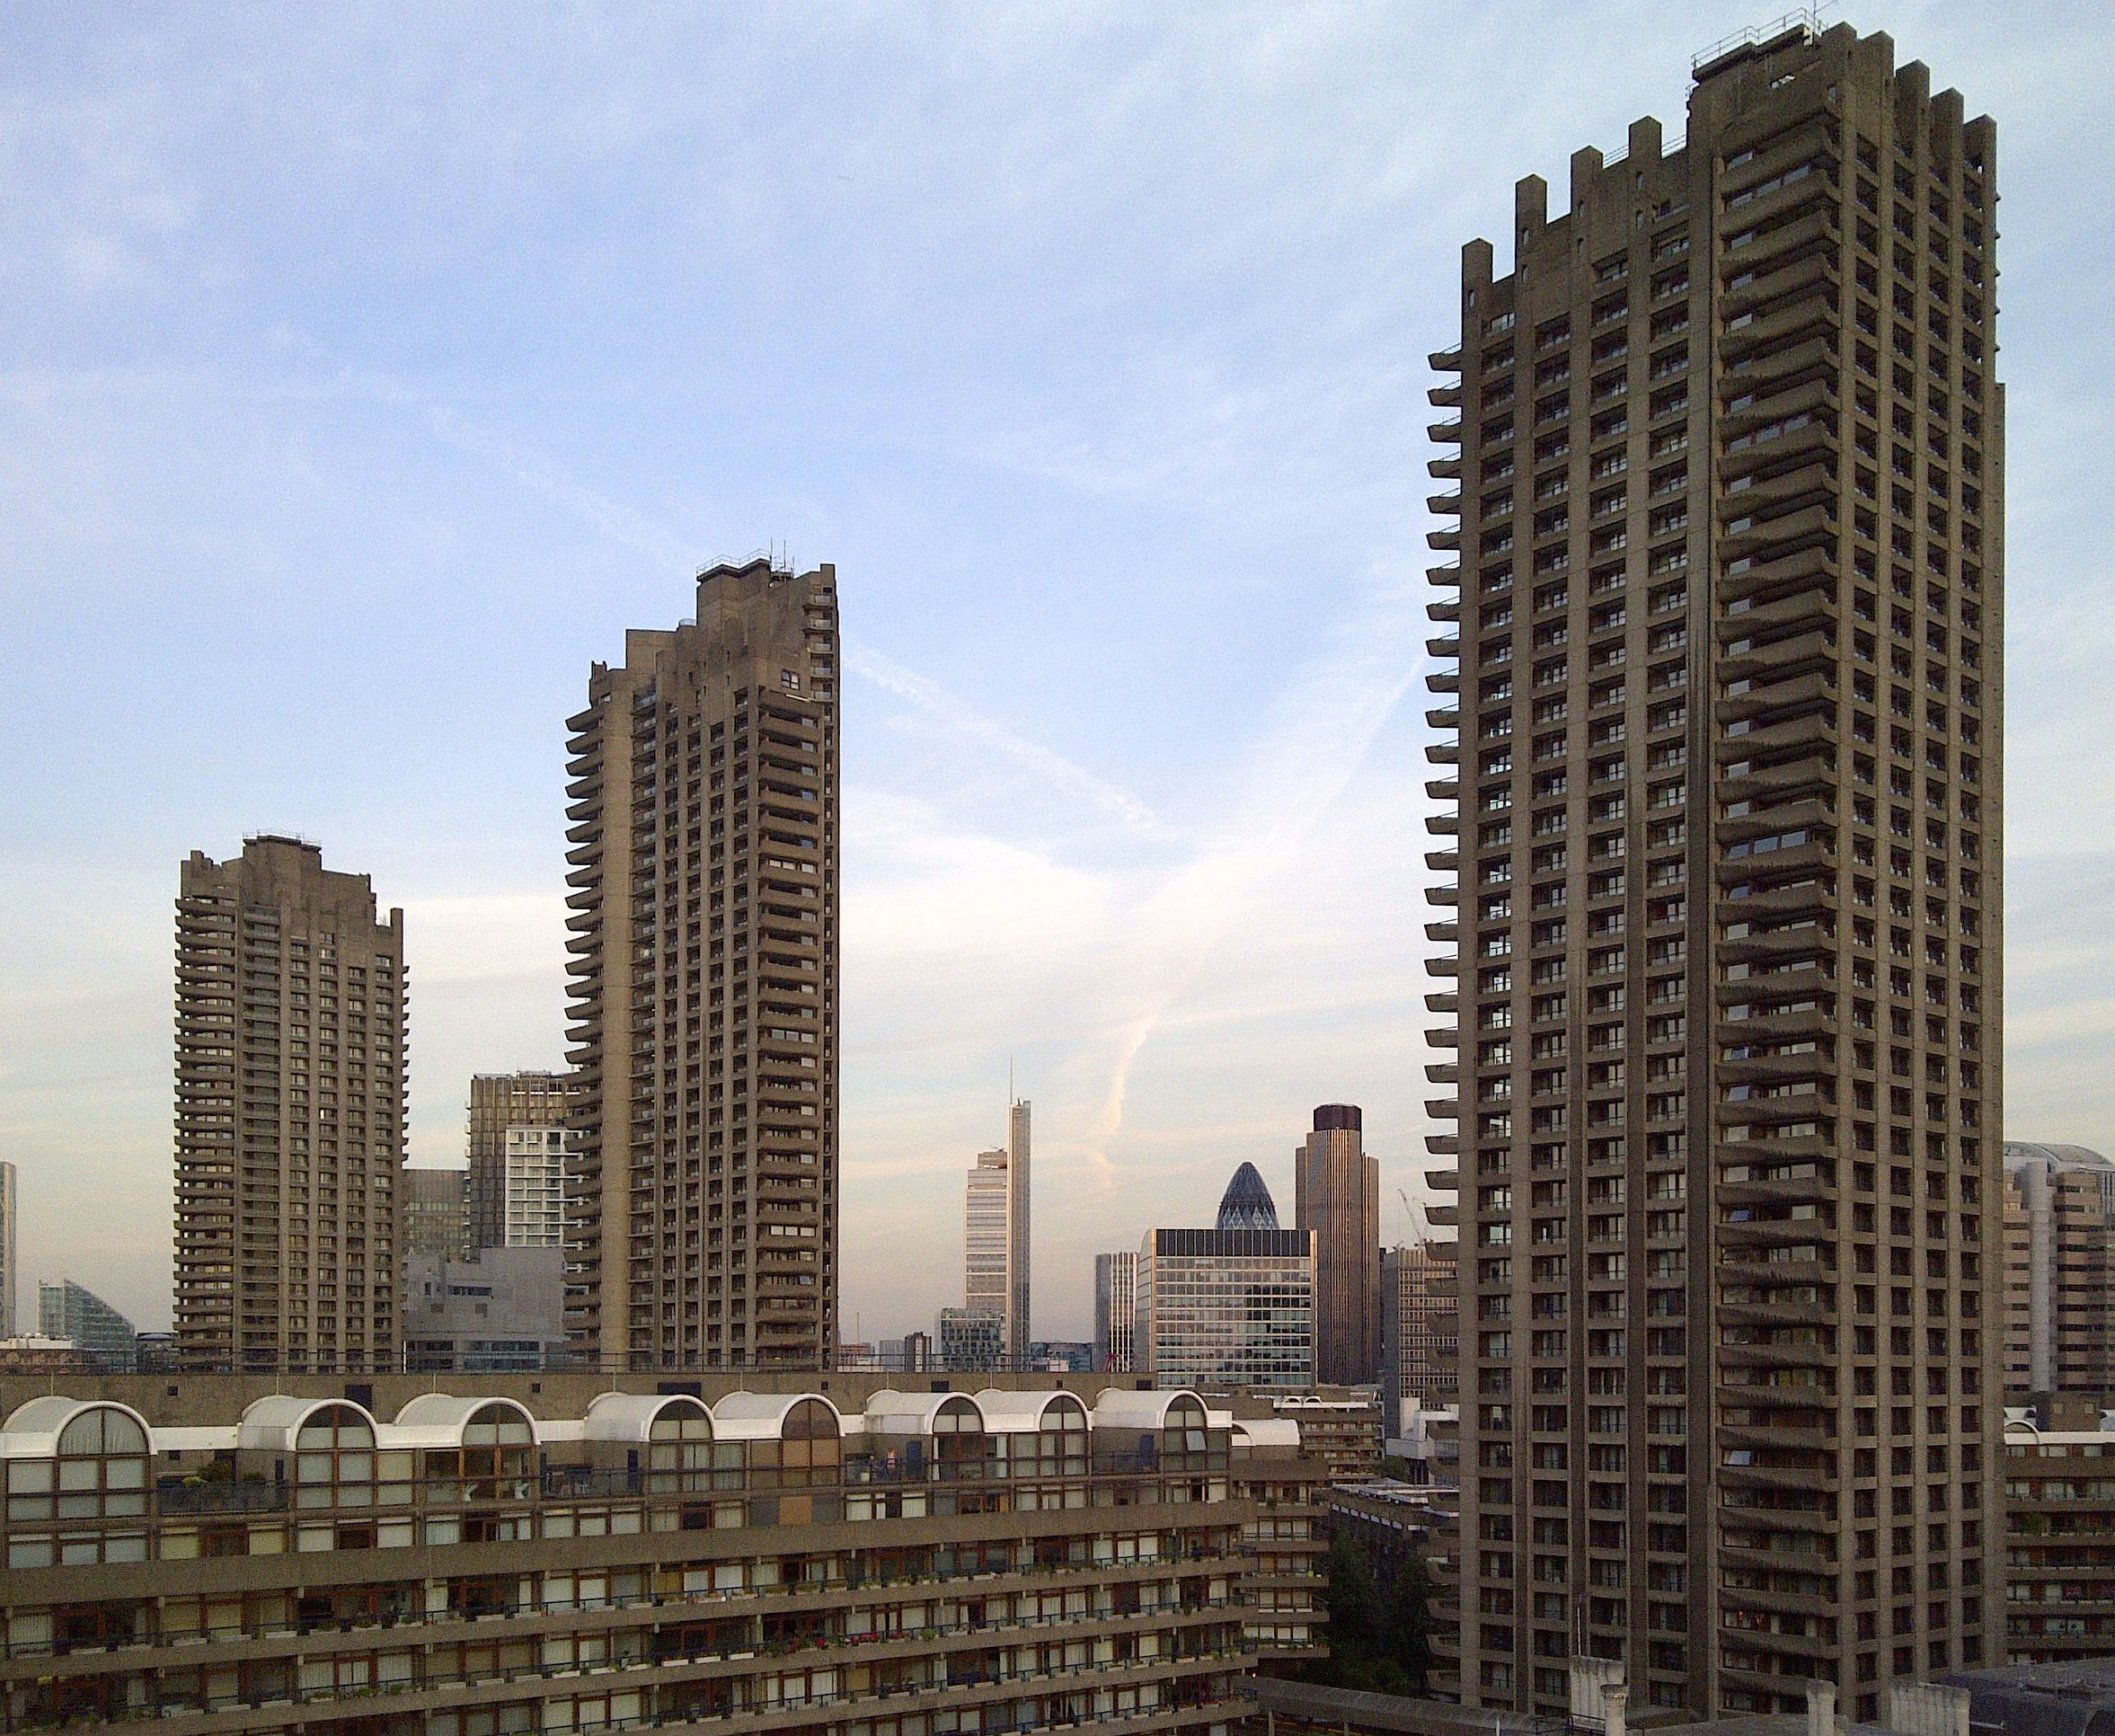 Barbican-estate Check out the nicest looking London skyscrapers